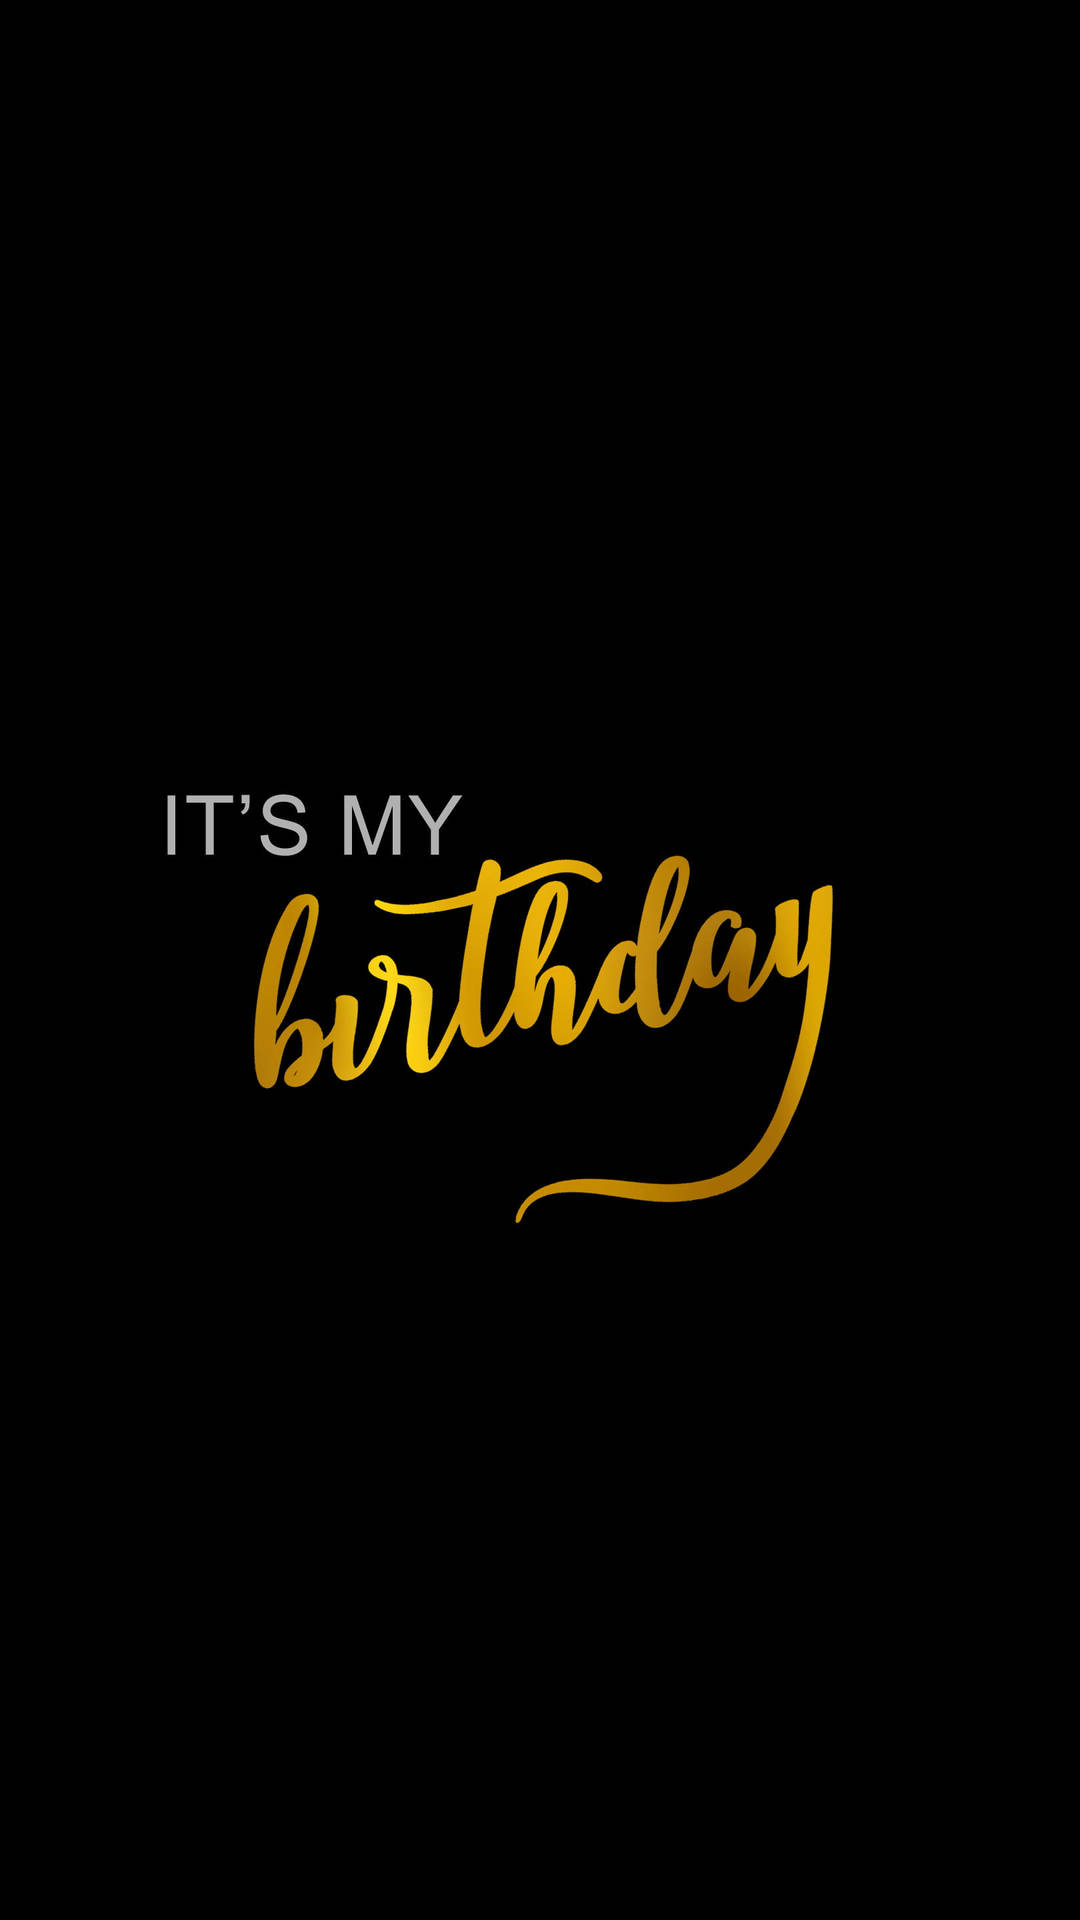 Download It's My Birthday Written On Black Background Wallpaper | Wallpapers .com